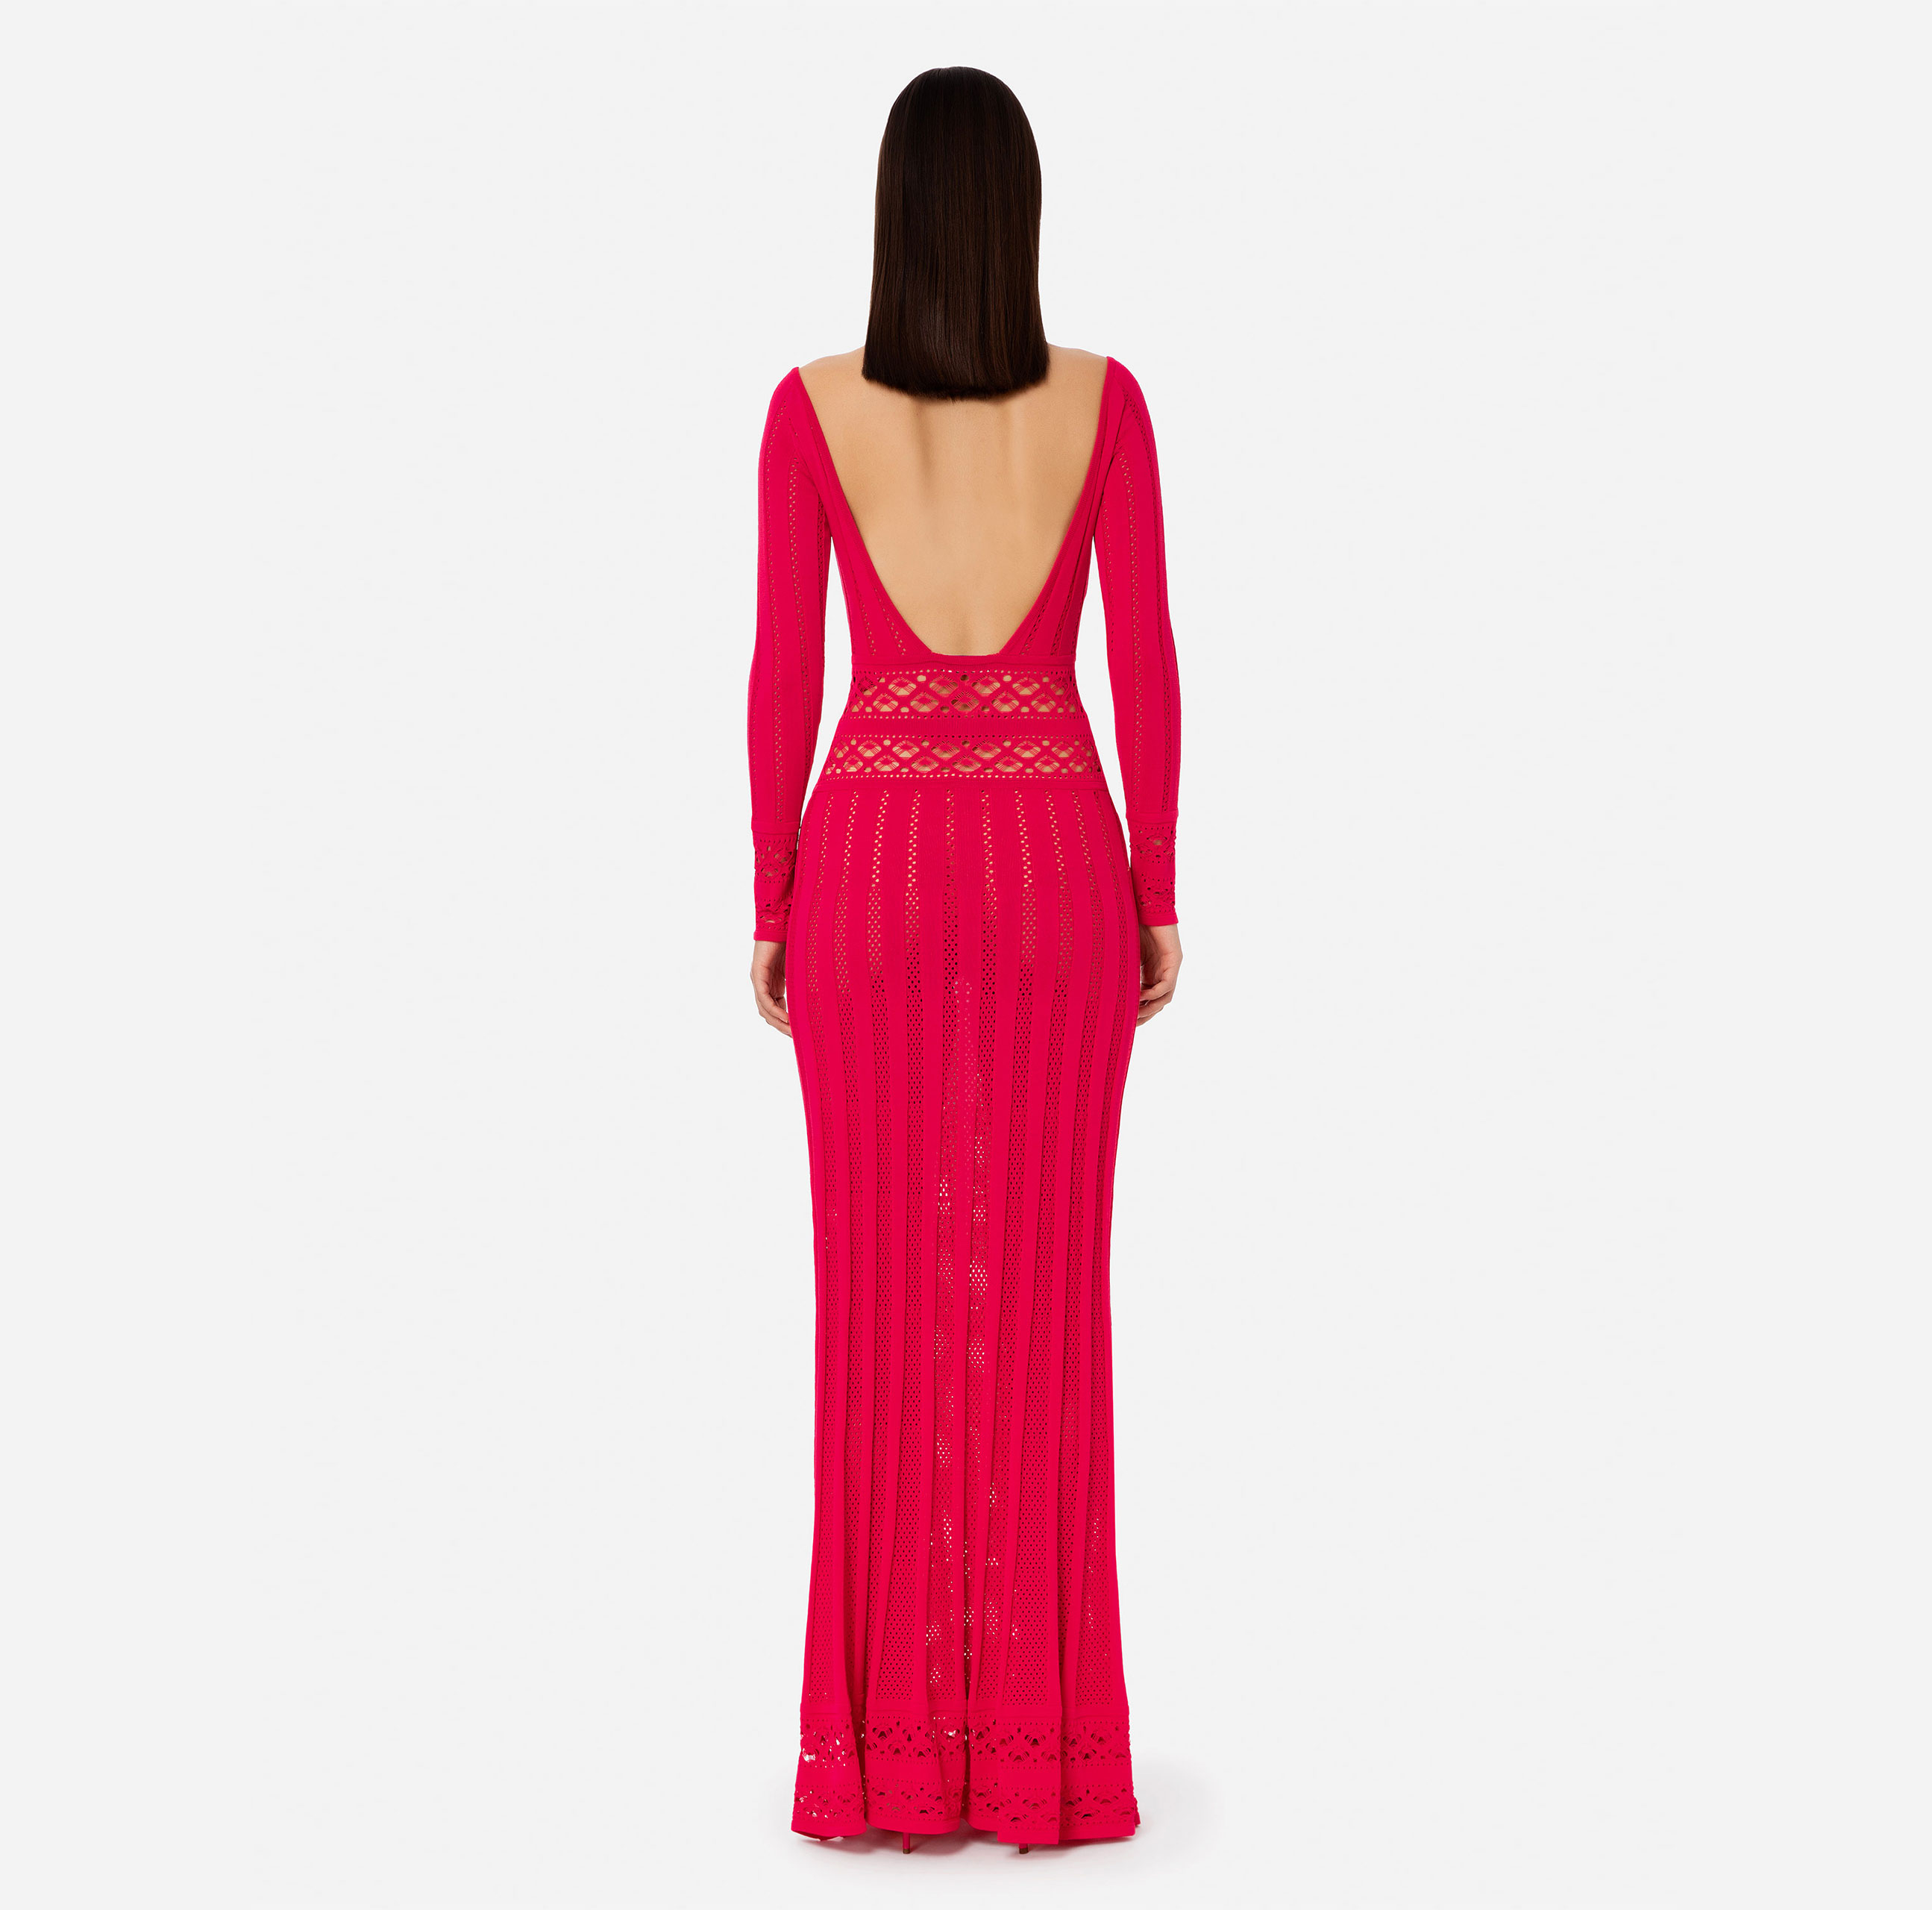 Red carpet dress in lace stitch knit with mermaid skirt - Elisabetta Franchi